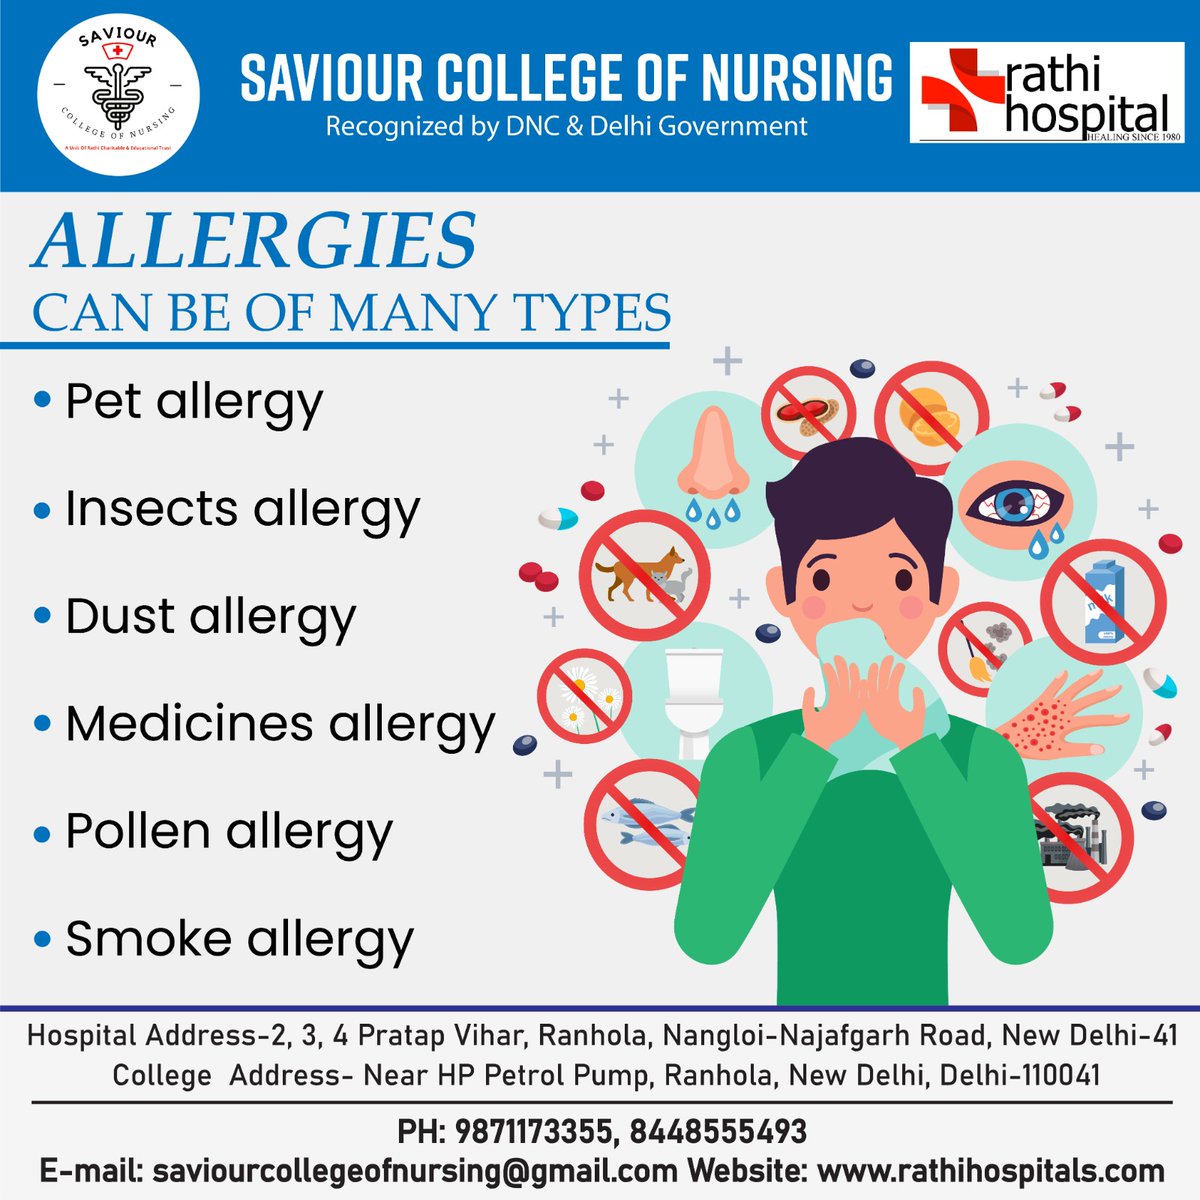 #didyouknow
Here are some types of allergies that you must have the knowledge about to become a nurse.
Book your seat today for GNM & ANM nursing - 8448555493
.
.
#saviourcollege #allergy #typesofallergies #admissions #Admissionopen #admissionsopen2023 #anmnursing #gnmnursing